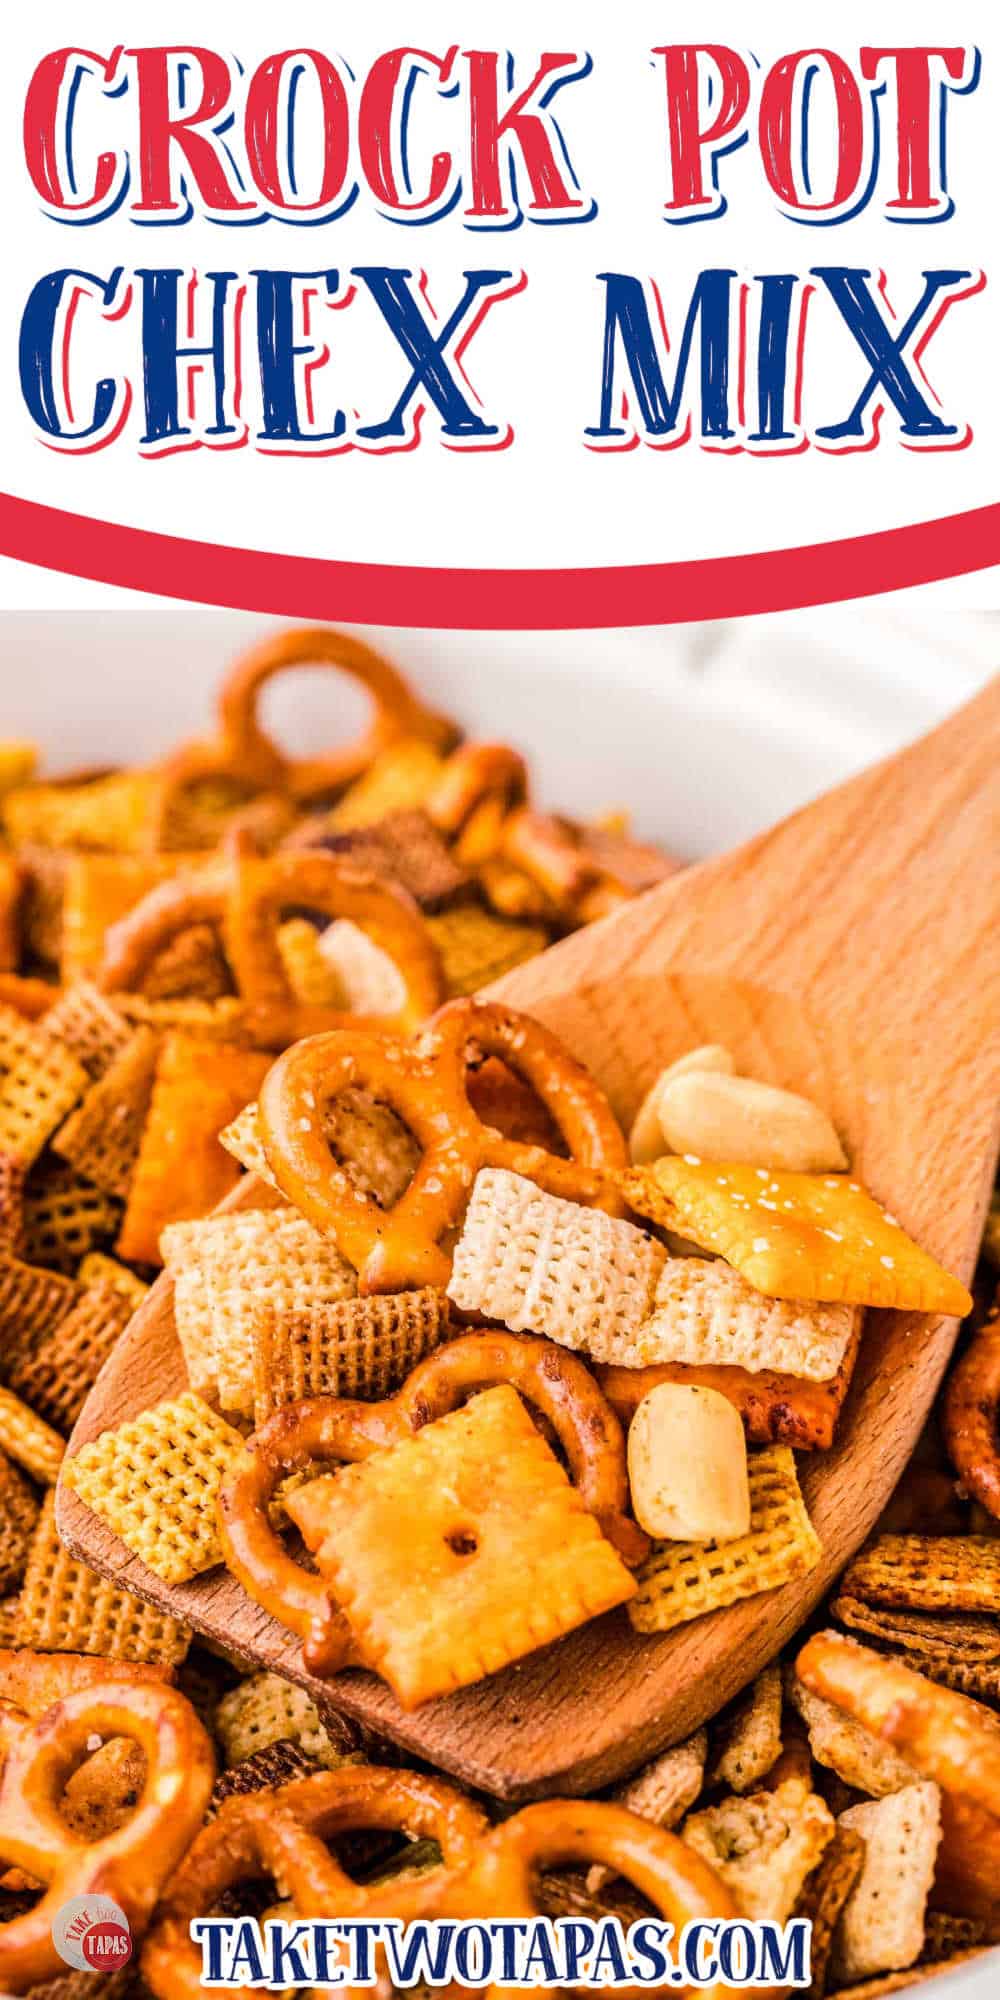 spoon of chex mix with white banner and red text